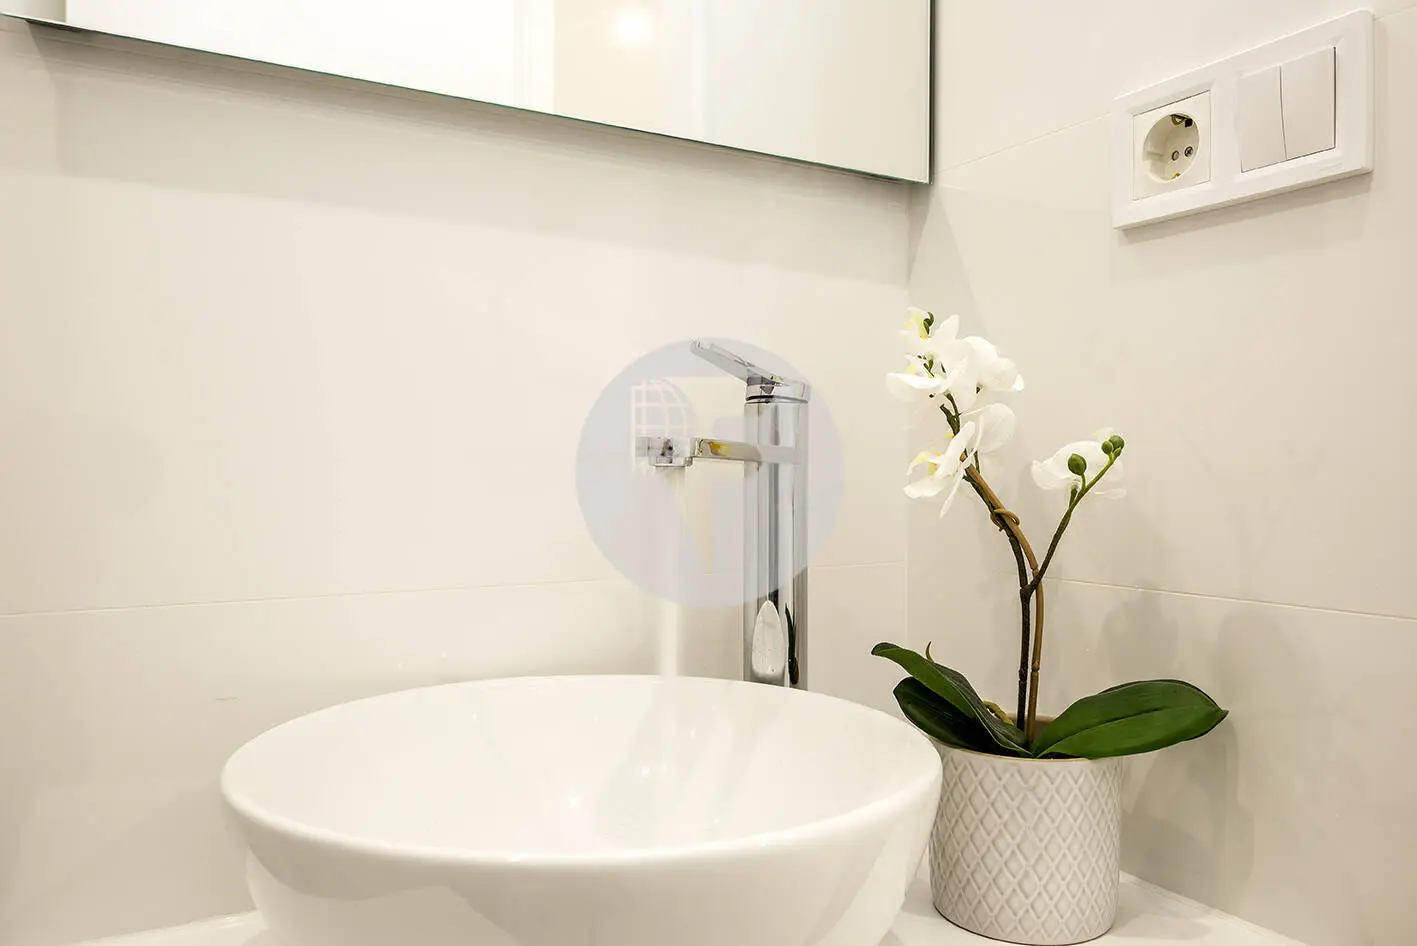 Brand new completely renovated apartment on Aragó street in the heart of El Clot in Barcelona. 28